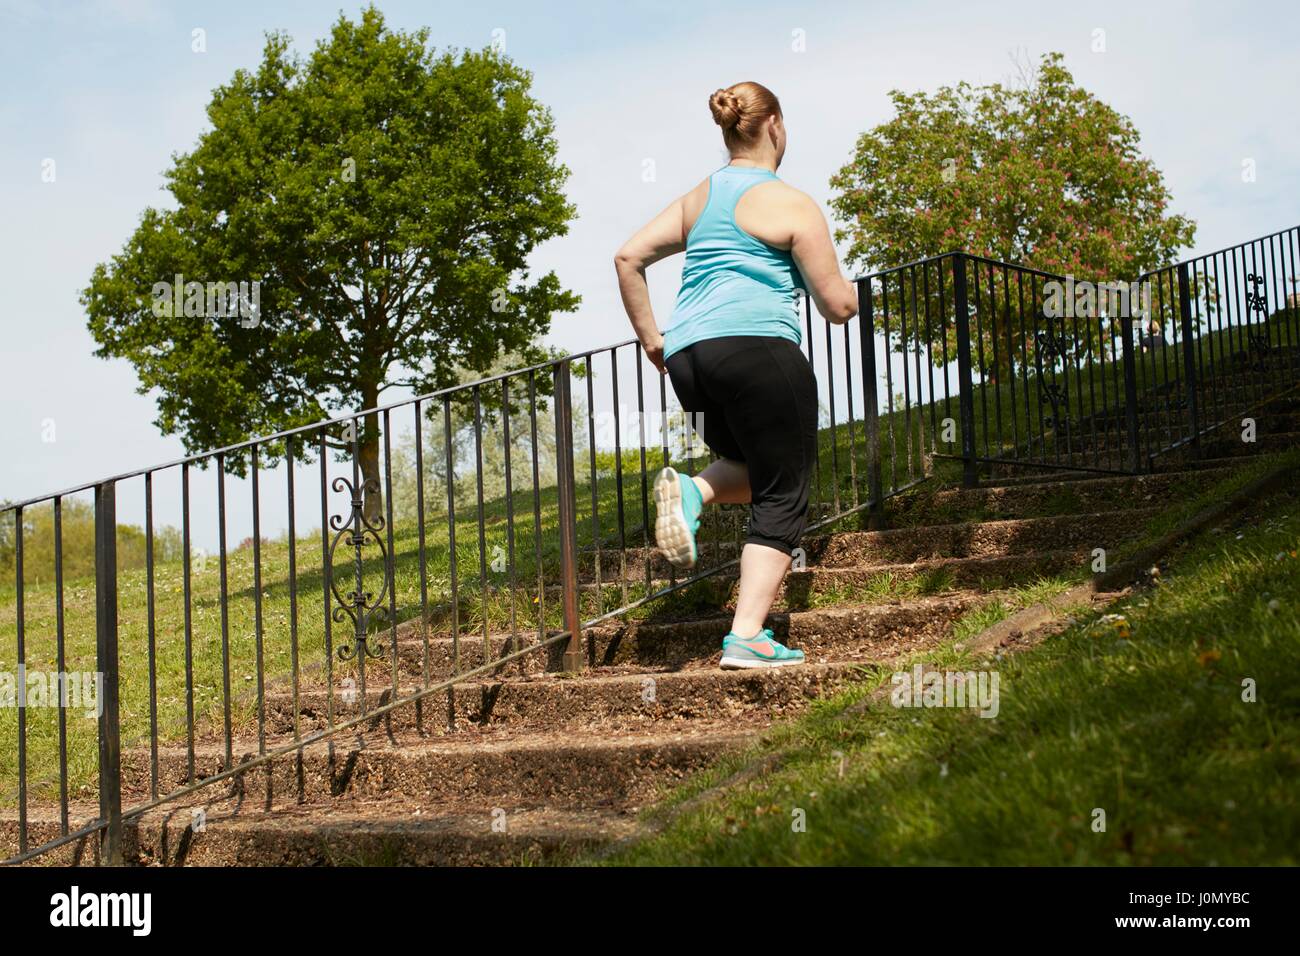 Young woman running up steps. Stock Photo